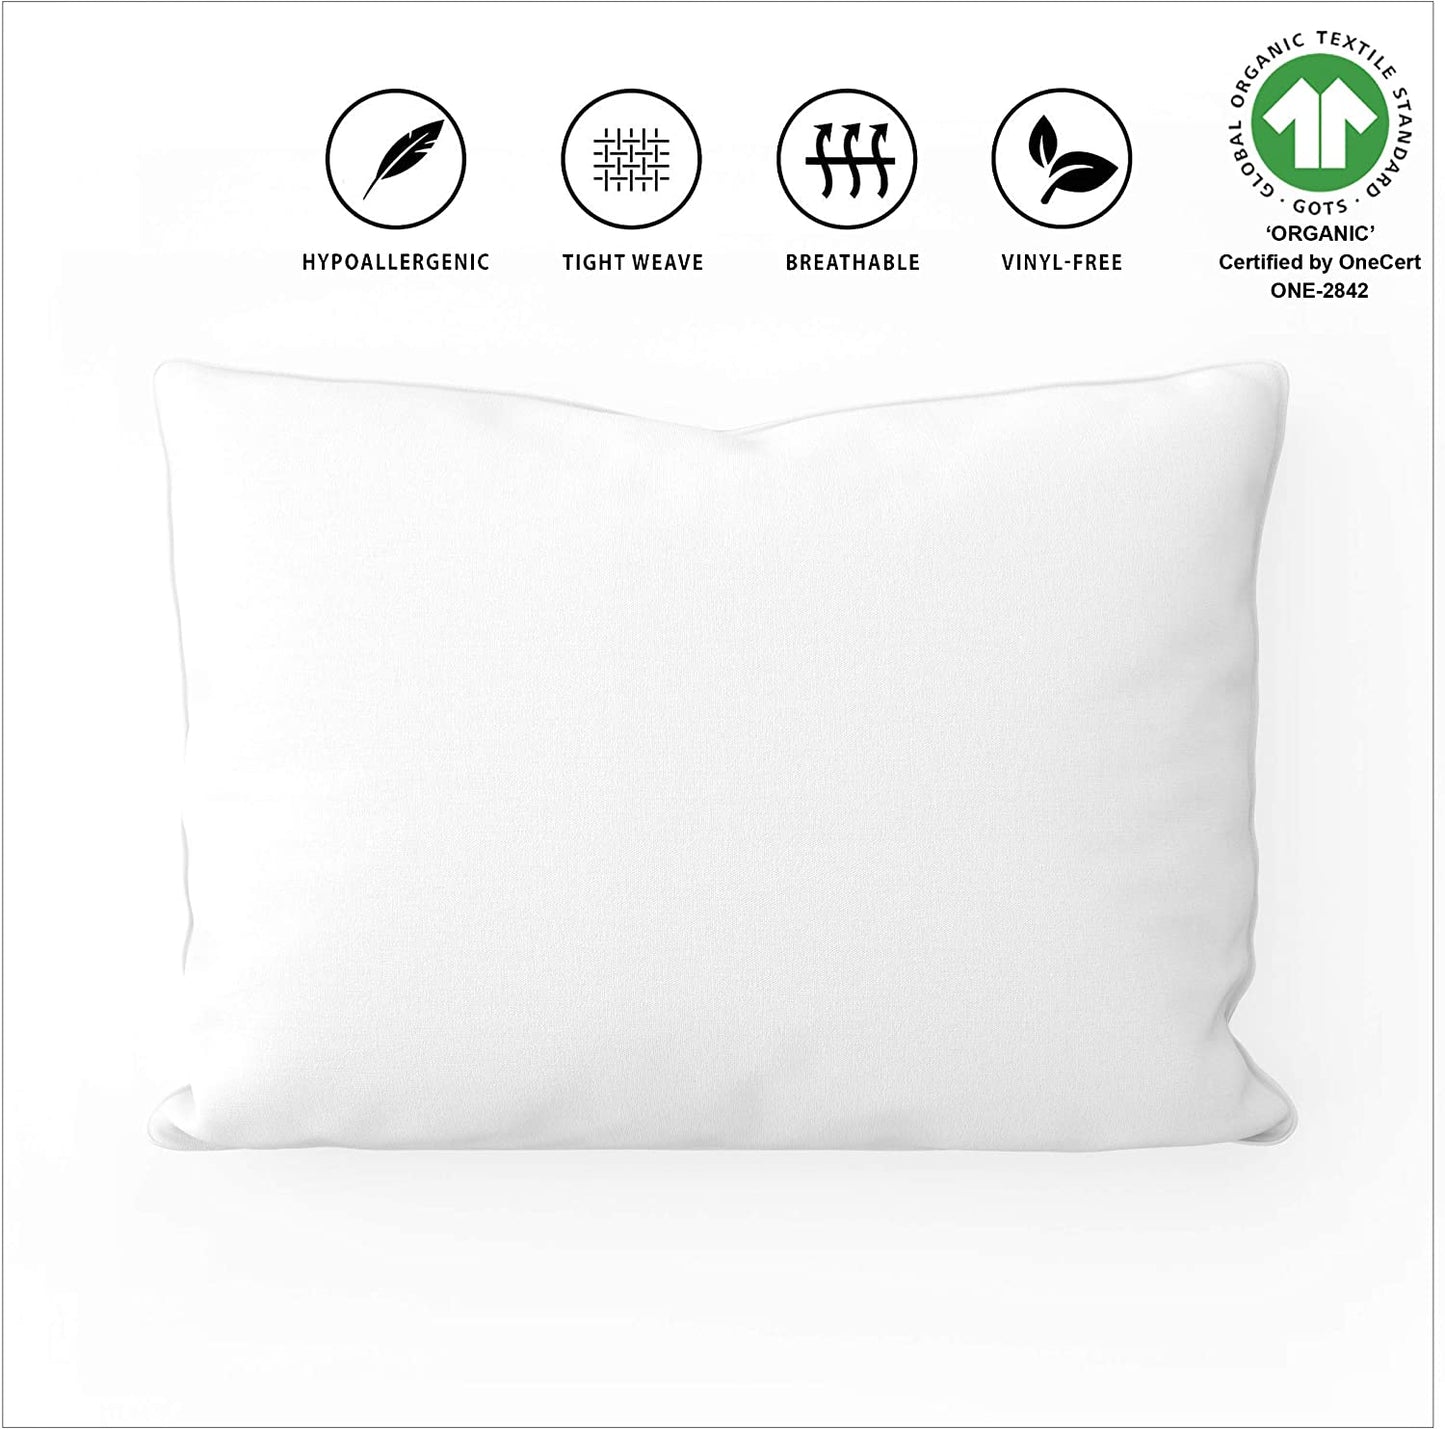 Organic Pillow Protector (Set of 2) GOTS Certified Organic Cotton Pillow Cases Zippered Natural Breathable Safer Barrier Fits Queen Pillow (20X30, Bright White)